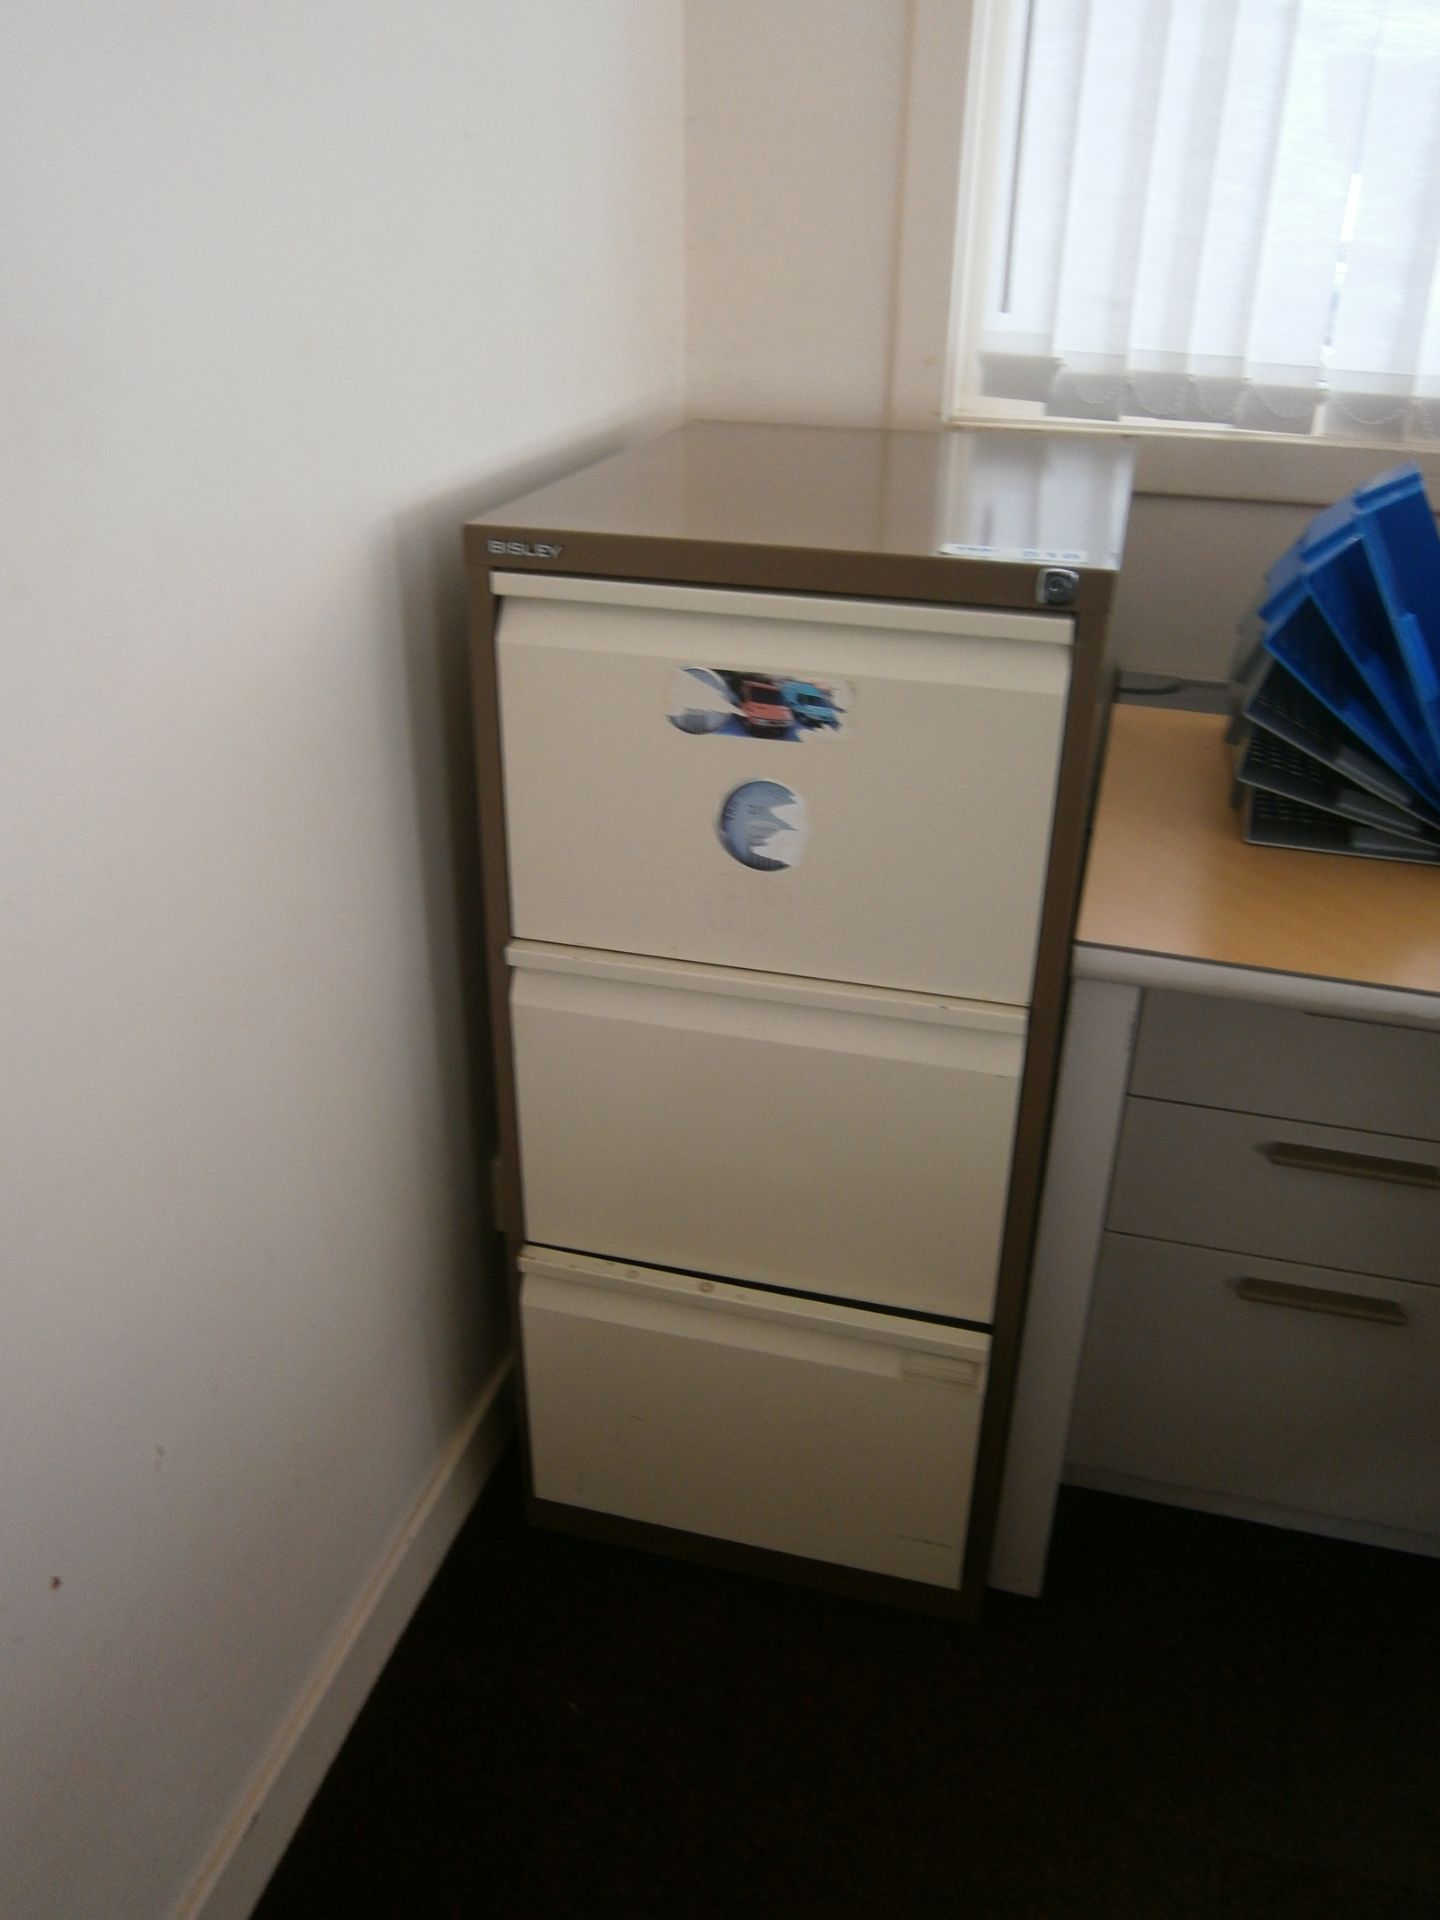 Coffee And Cream 3 Drawer Metal Filing Cabinet